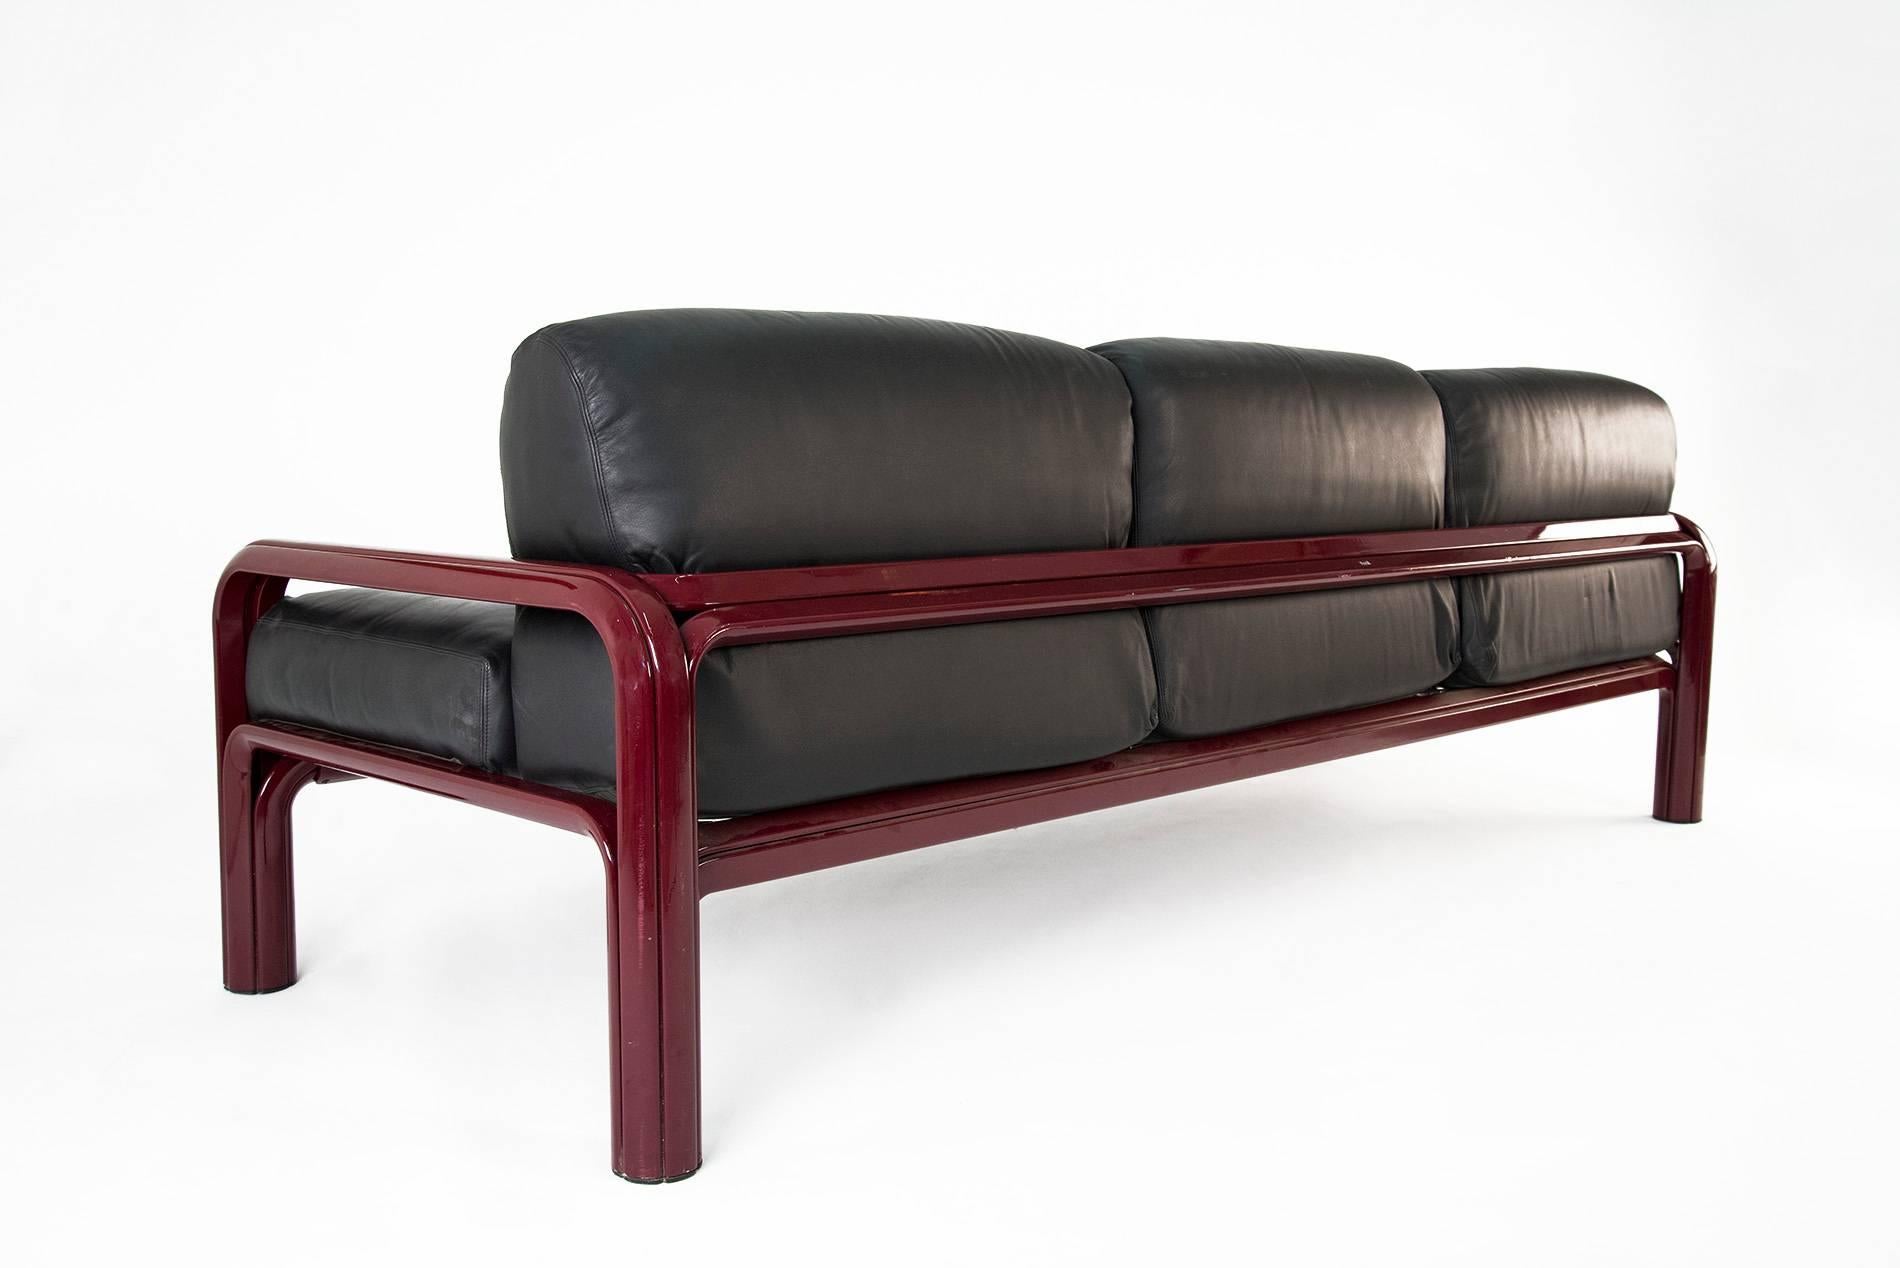 Three-seat sofa designed by Gae Aulenti for Knoll in 1976. Bordeaux lacquered extruded steel structure with black leather upholstery. Manufacturer's mark on the back. Good original vintage conditions.